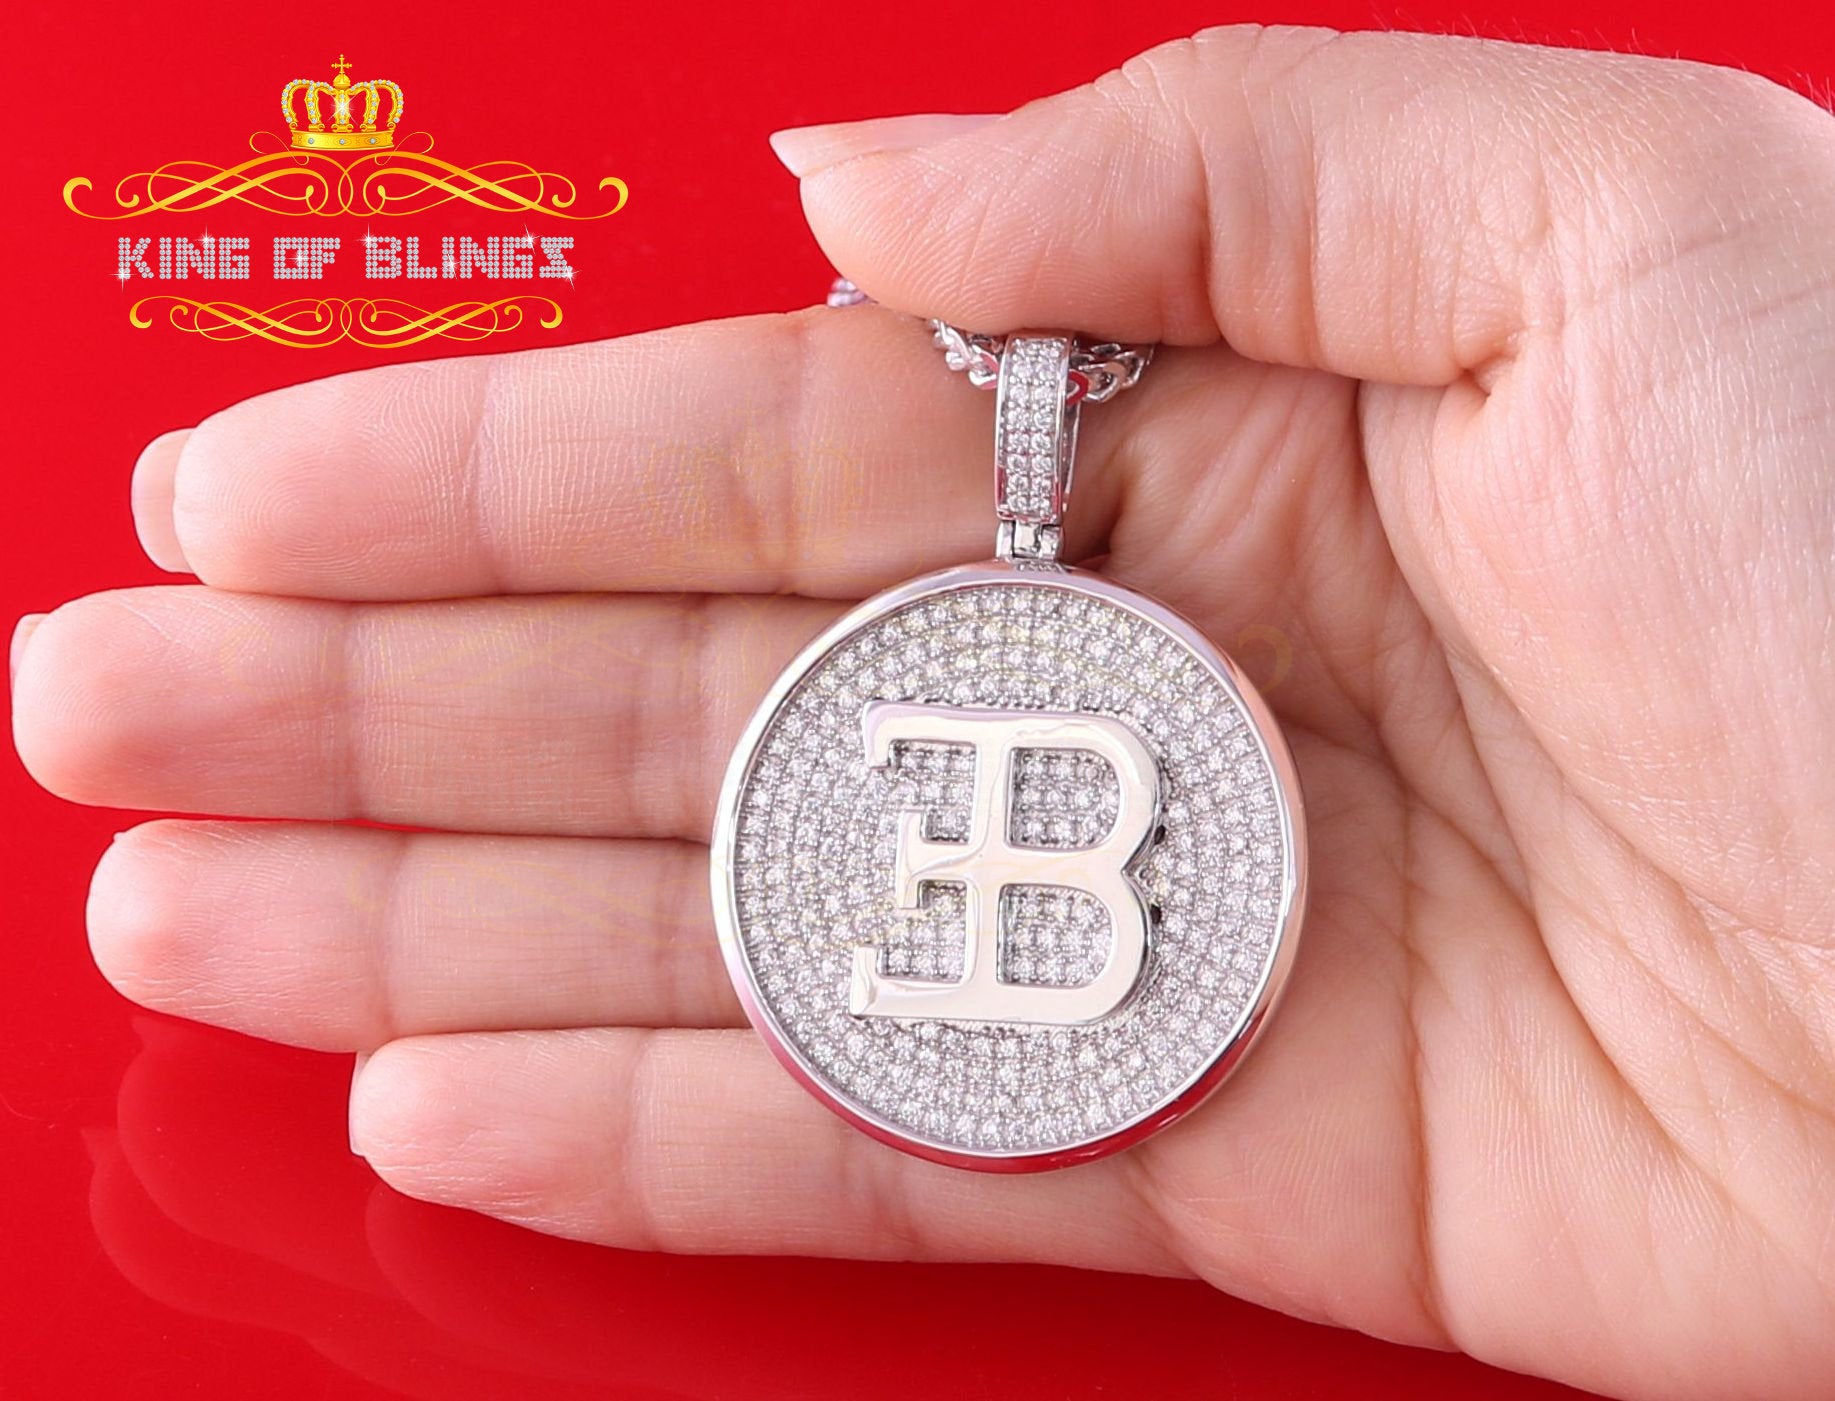 King Of Bling's White Sterling Silver Numeric BE Letter Pendant with 3.04ct Cubic Zirconia Stone KING OF BLINGS